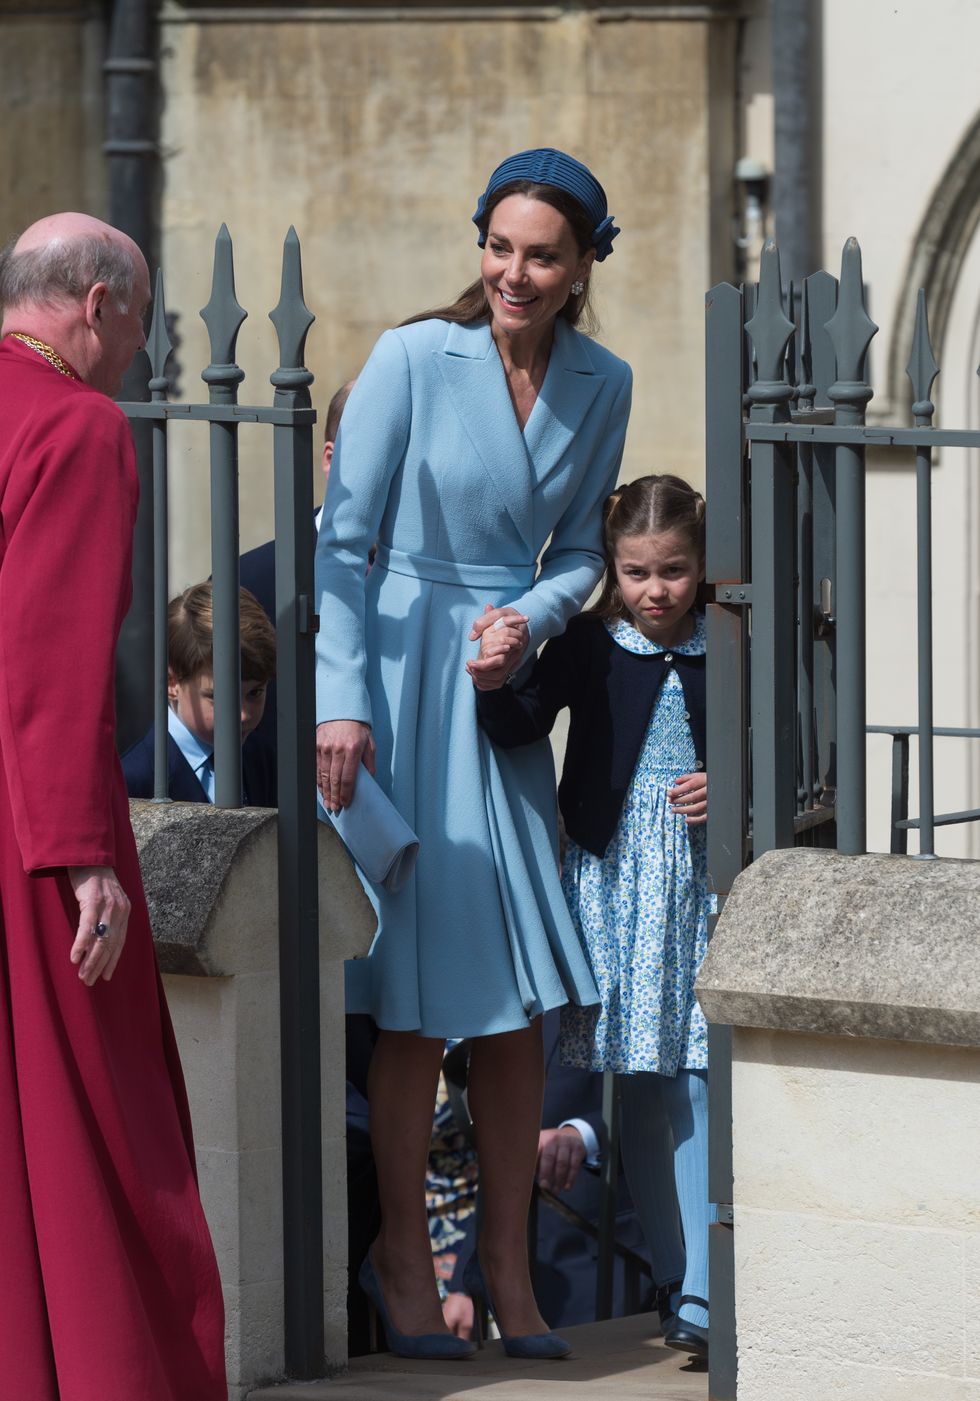 windsor, england   april 17 the duchess of cambridge with princess charlotte attend the traditional easter sunday church service at st georges chapel in the grounds of windsor castle on april 17, 2022 in windsor, england photo by antony jonesgc images